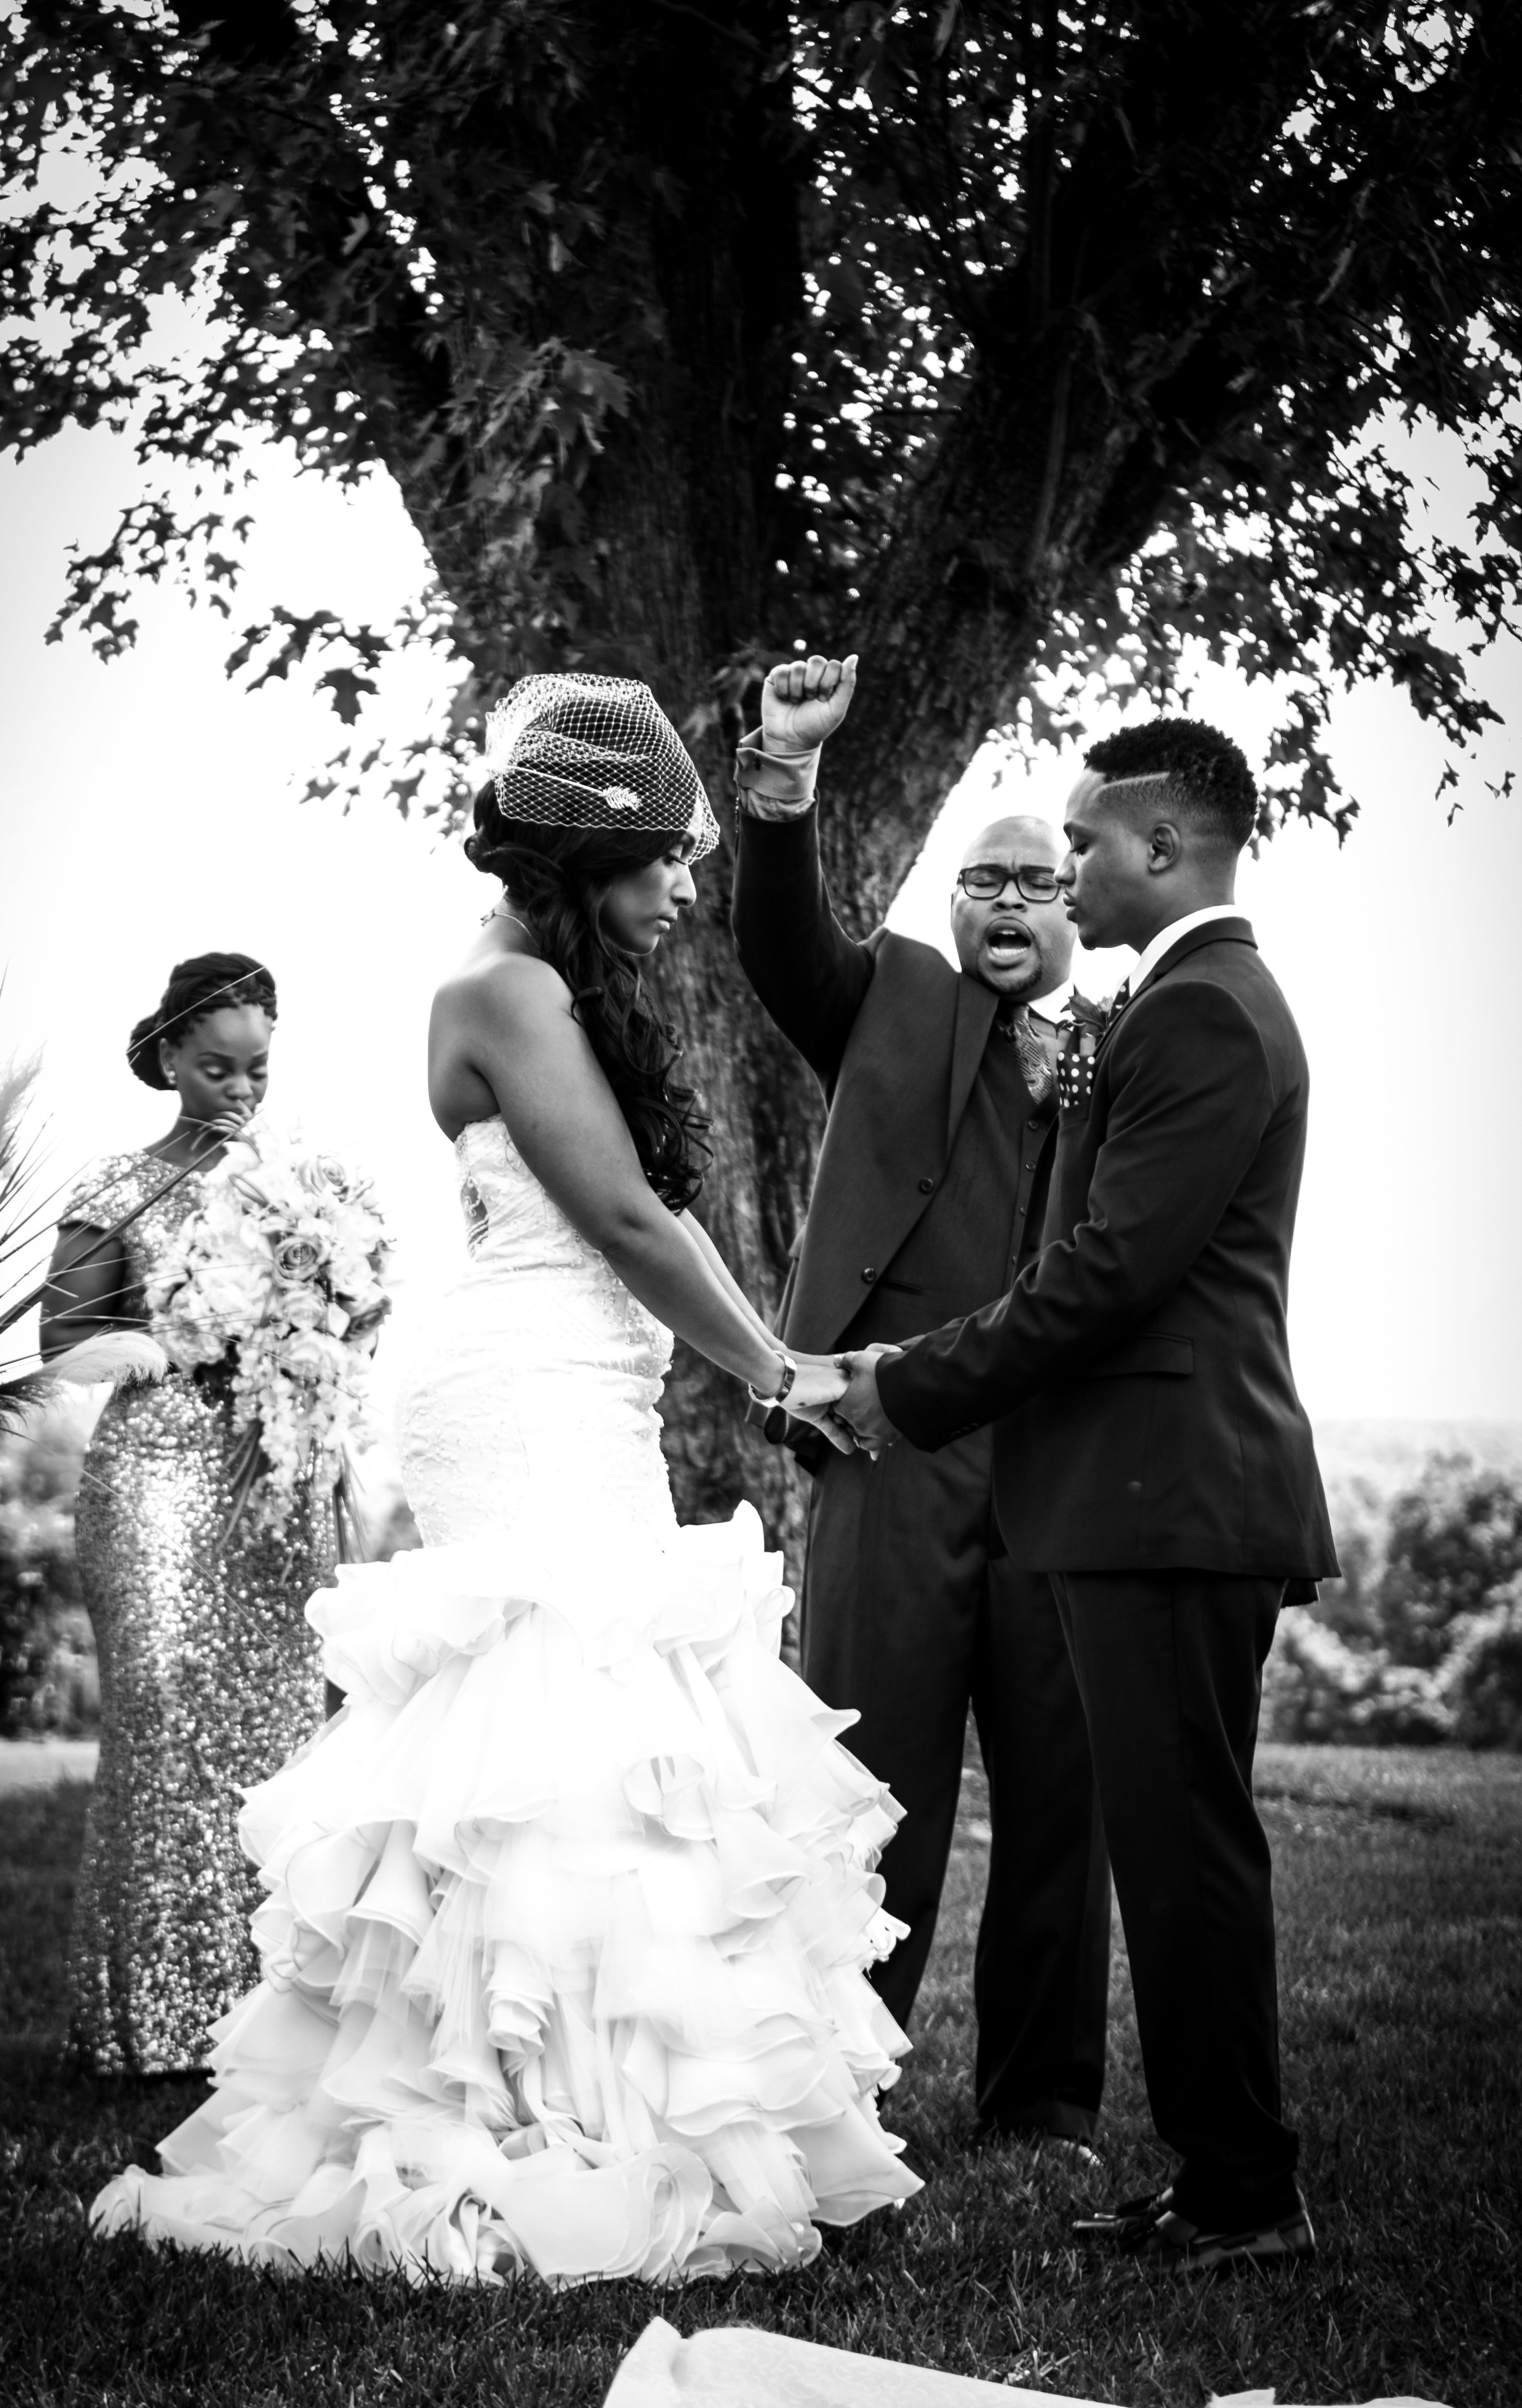 Bridal Bliss: Erin And Jamaal's DIY Wedding Photos Are All Kinds Of Special
